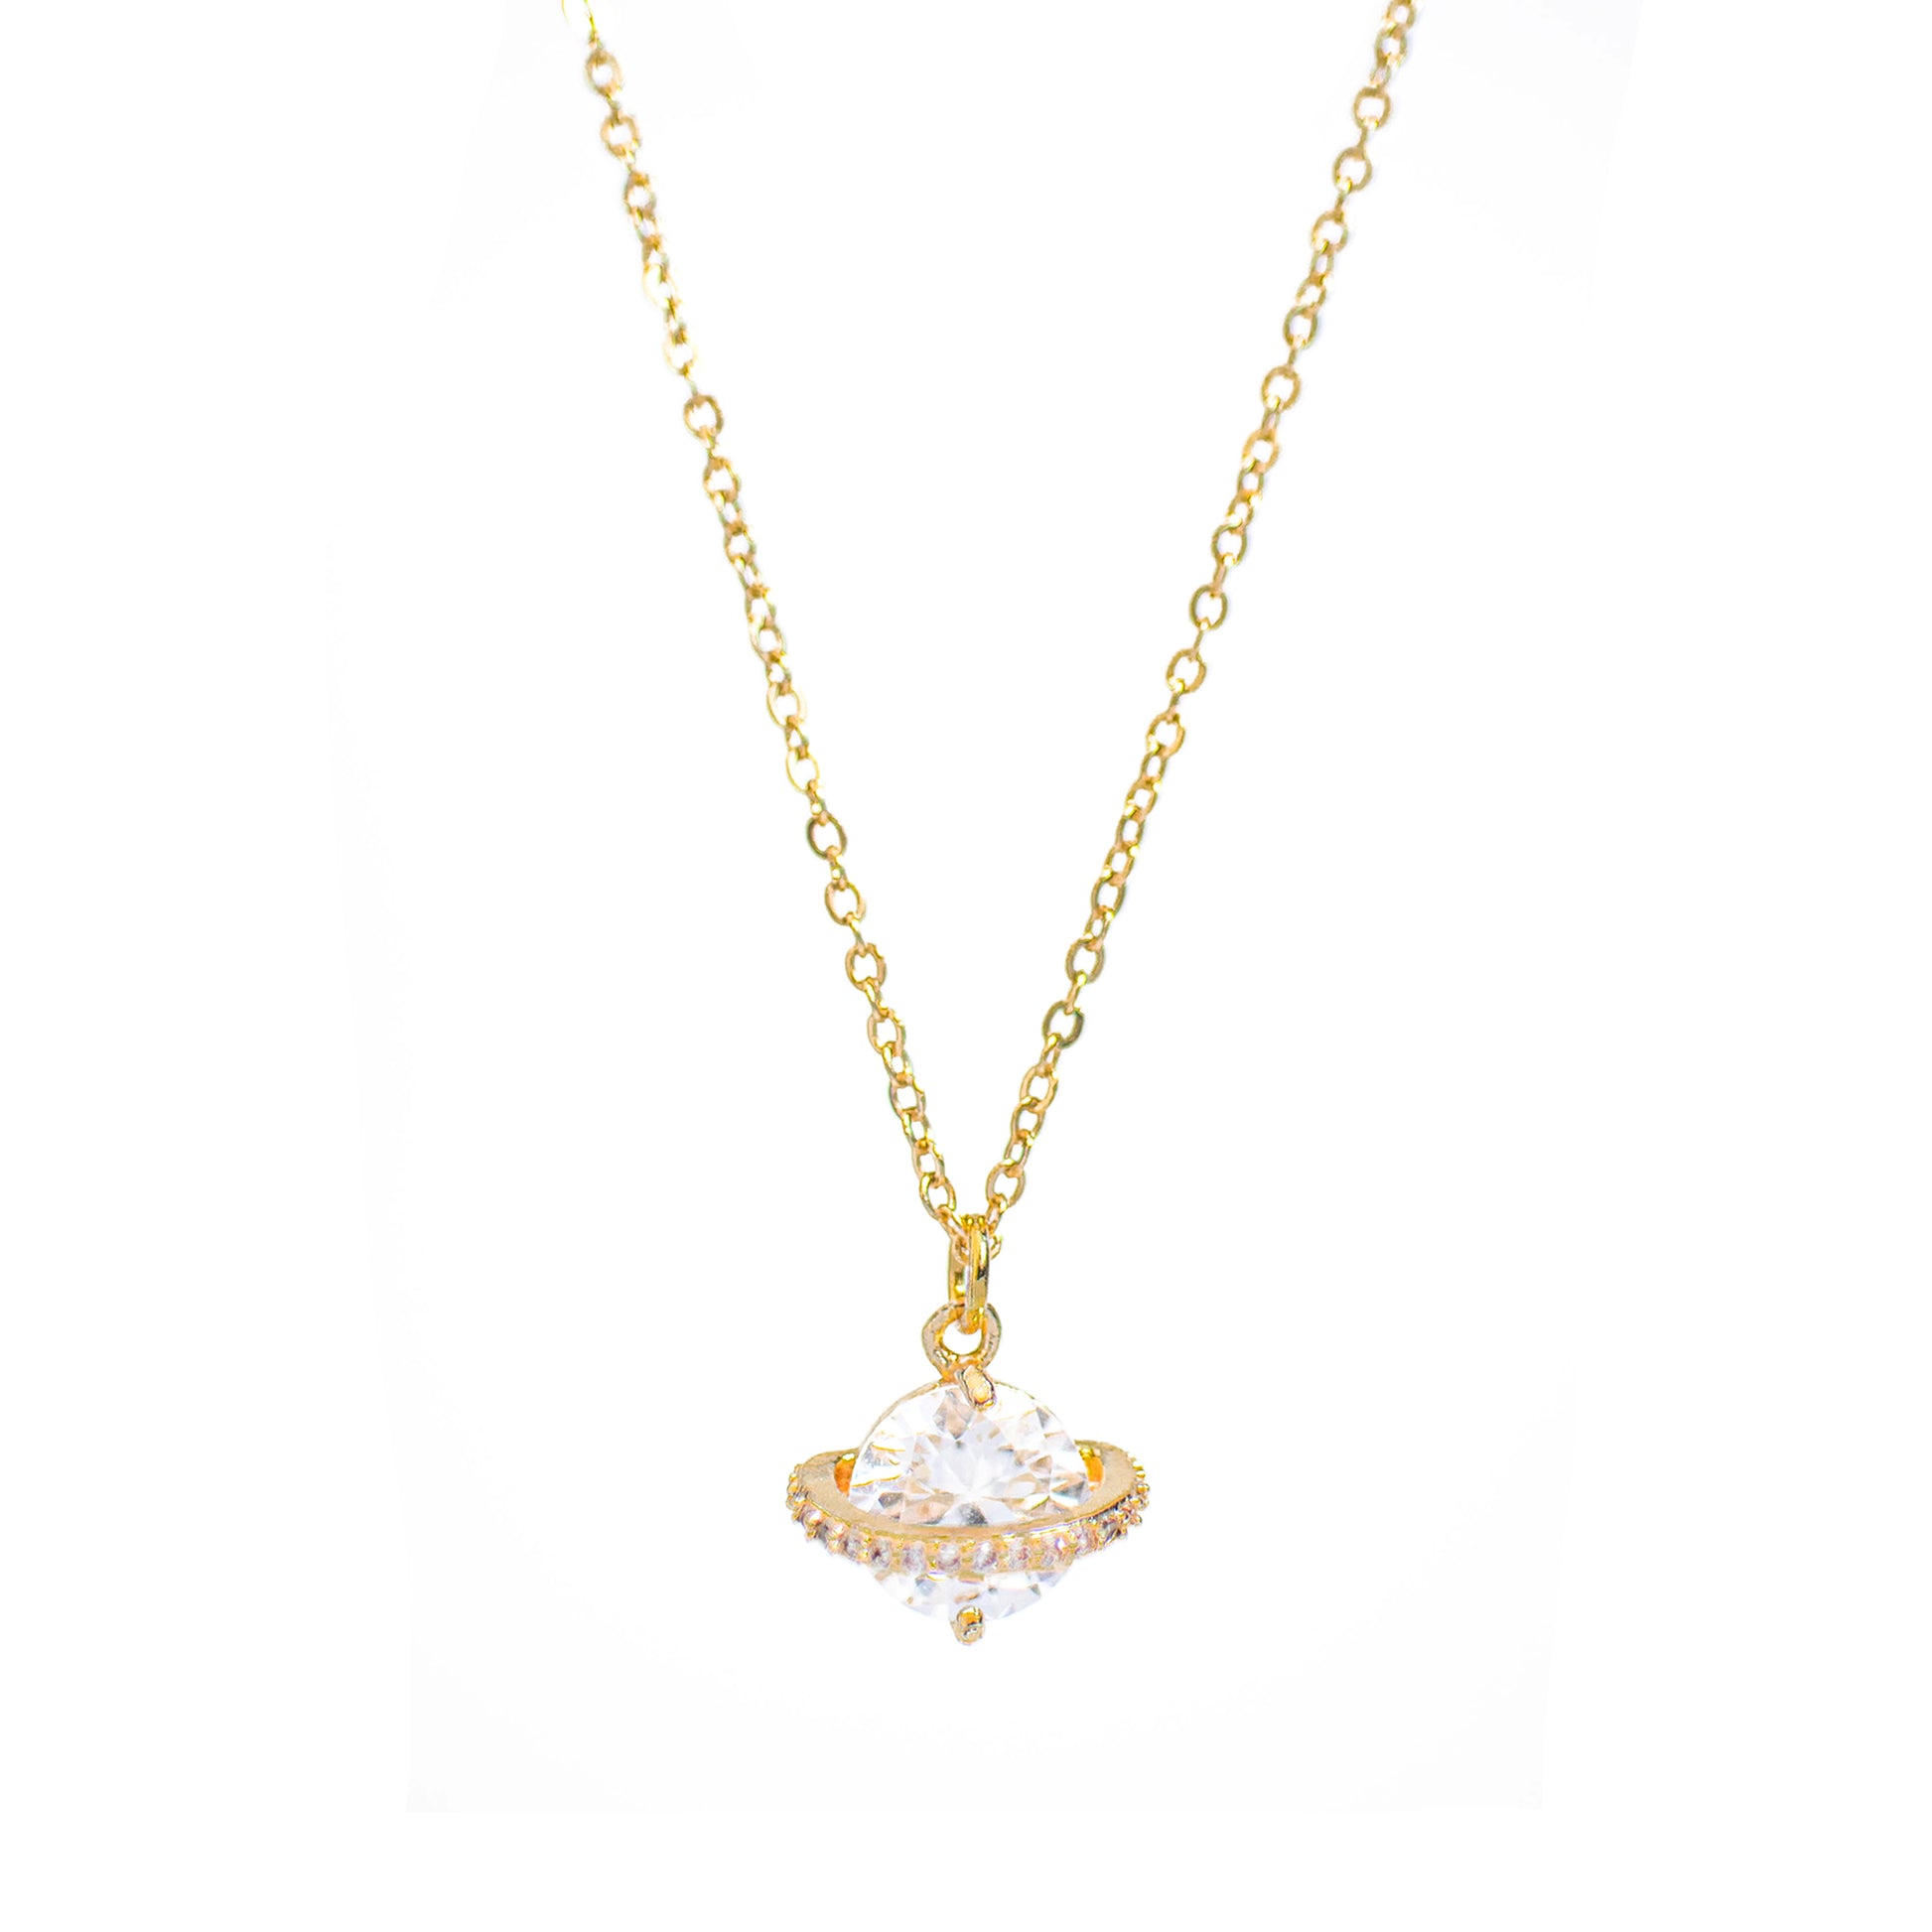 This photo features a thin chain necklace made of 14K gold-plated sterling silver, paired with a zircon planet pendant.